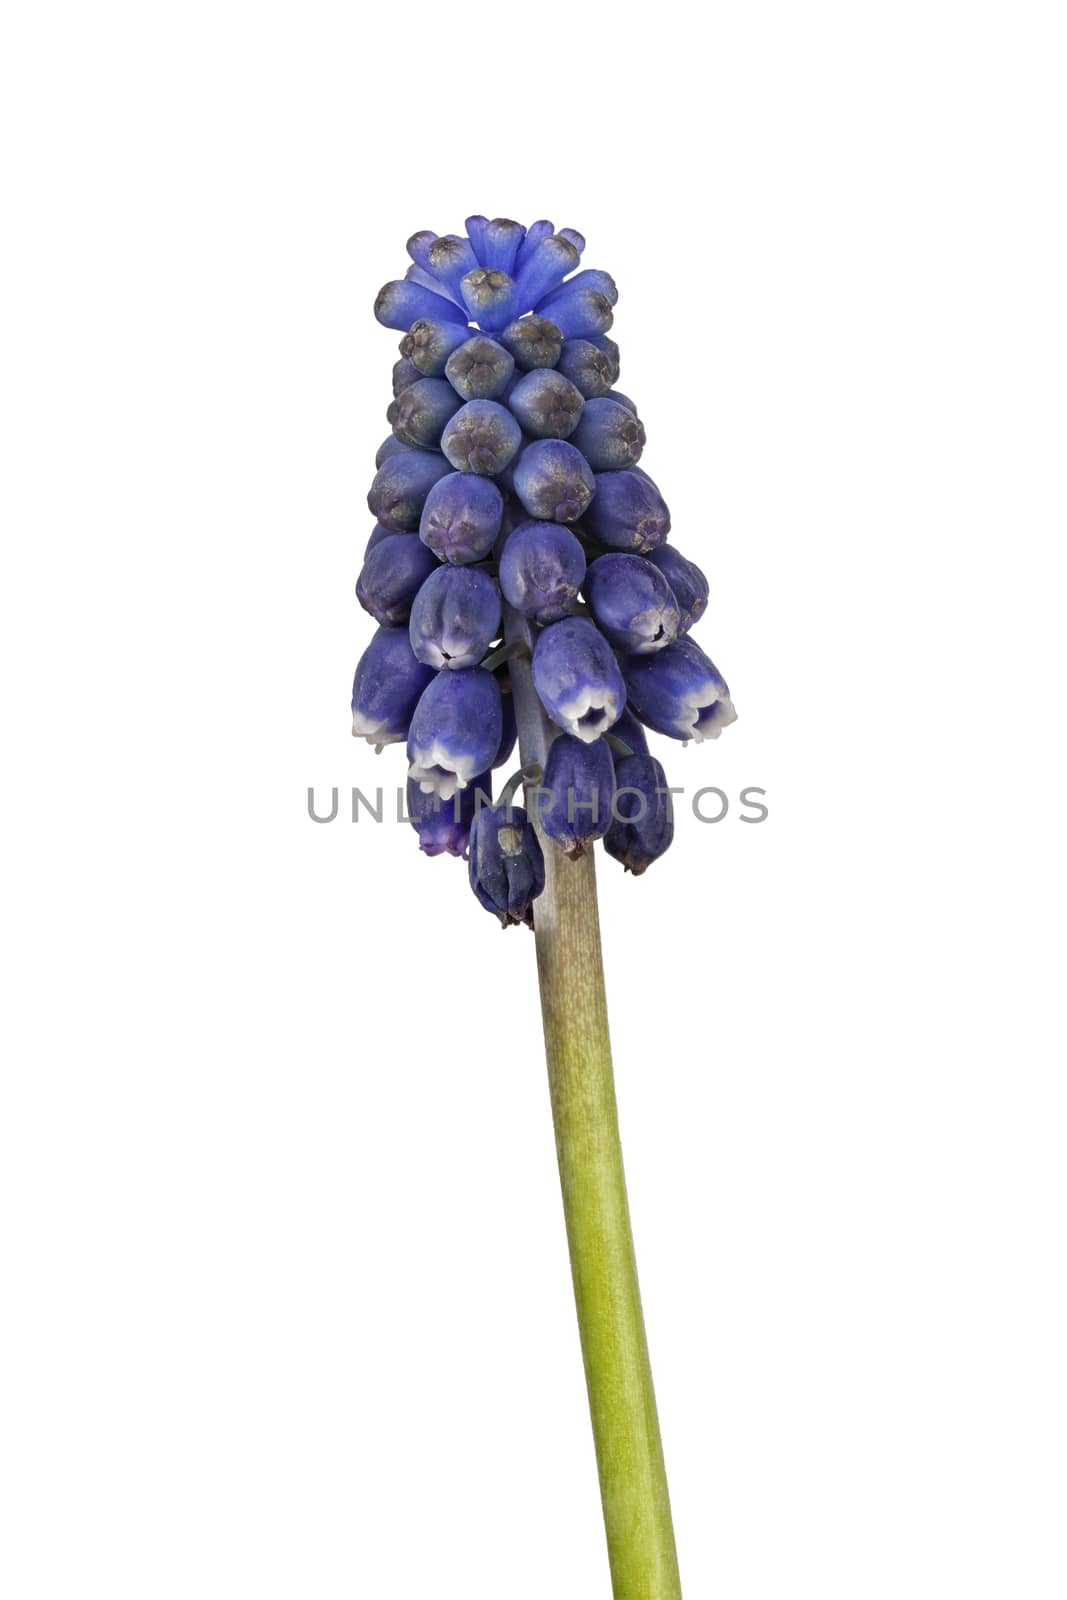 Blue grape hyacinth isolated on a white background